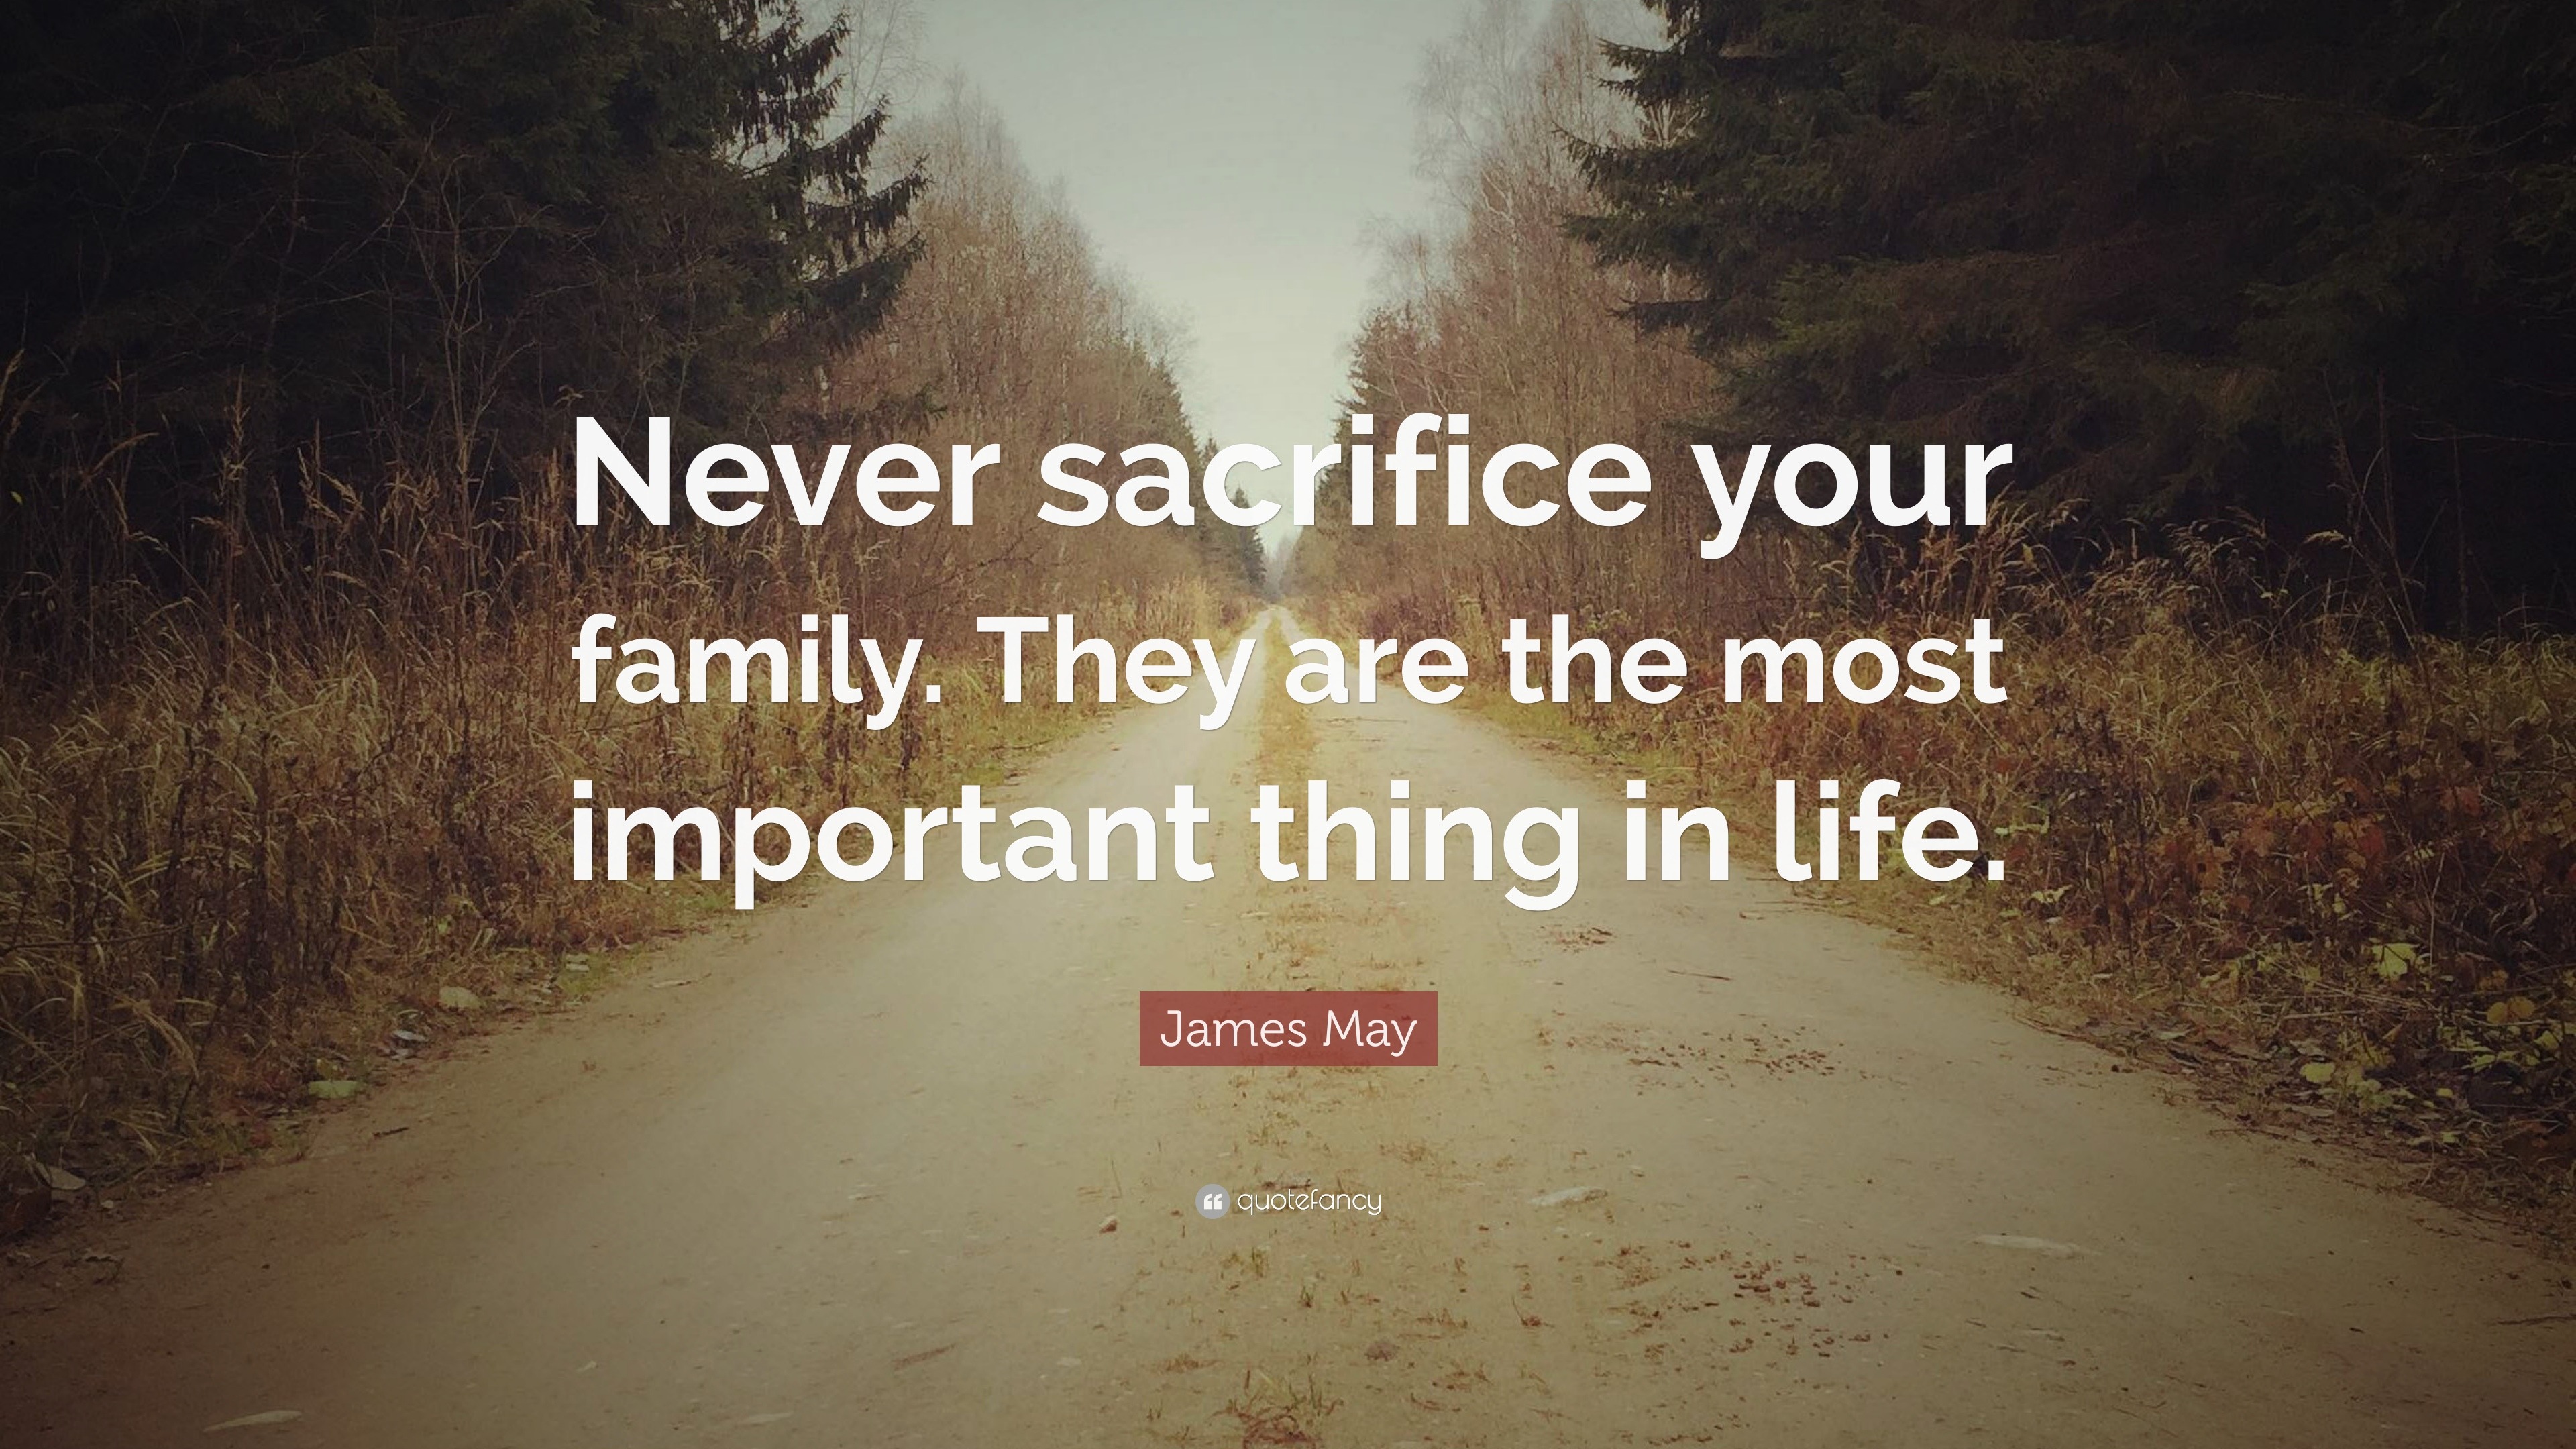 James May Quote  Never sacrifice your family  They are 